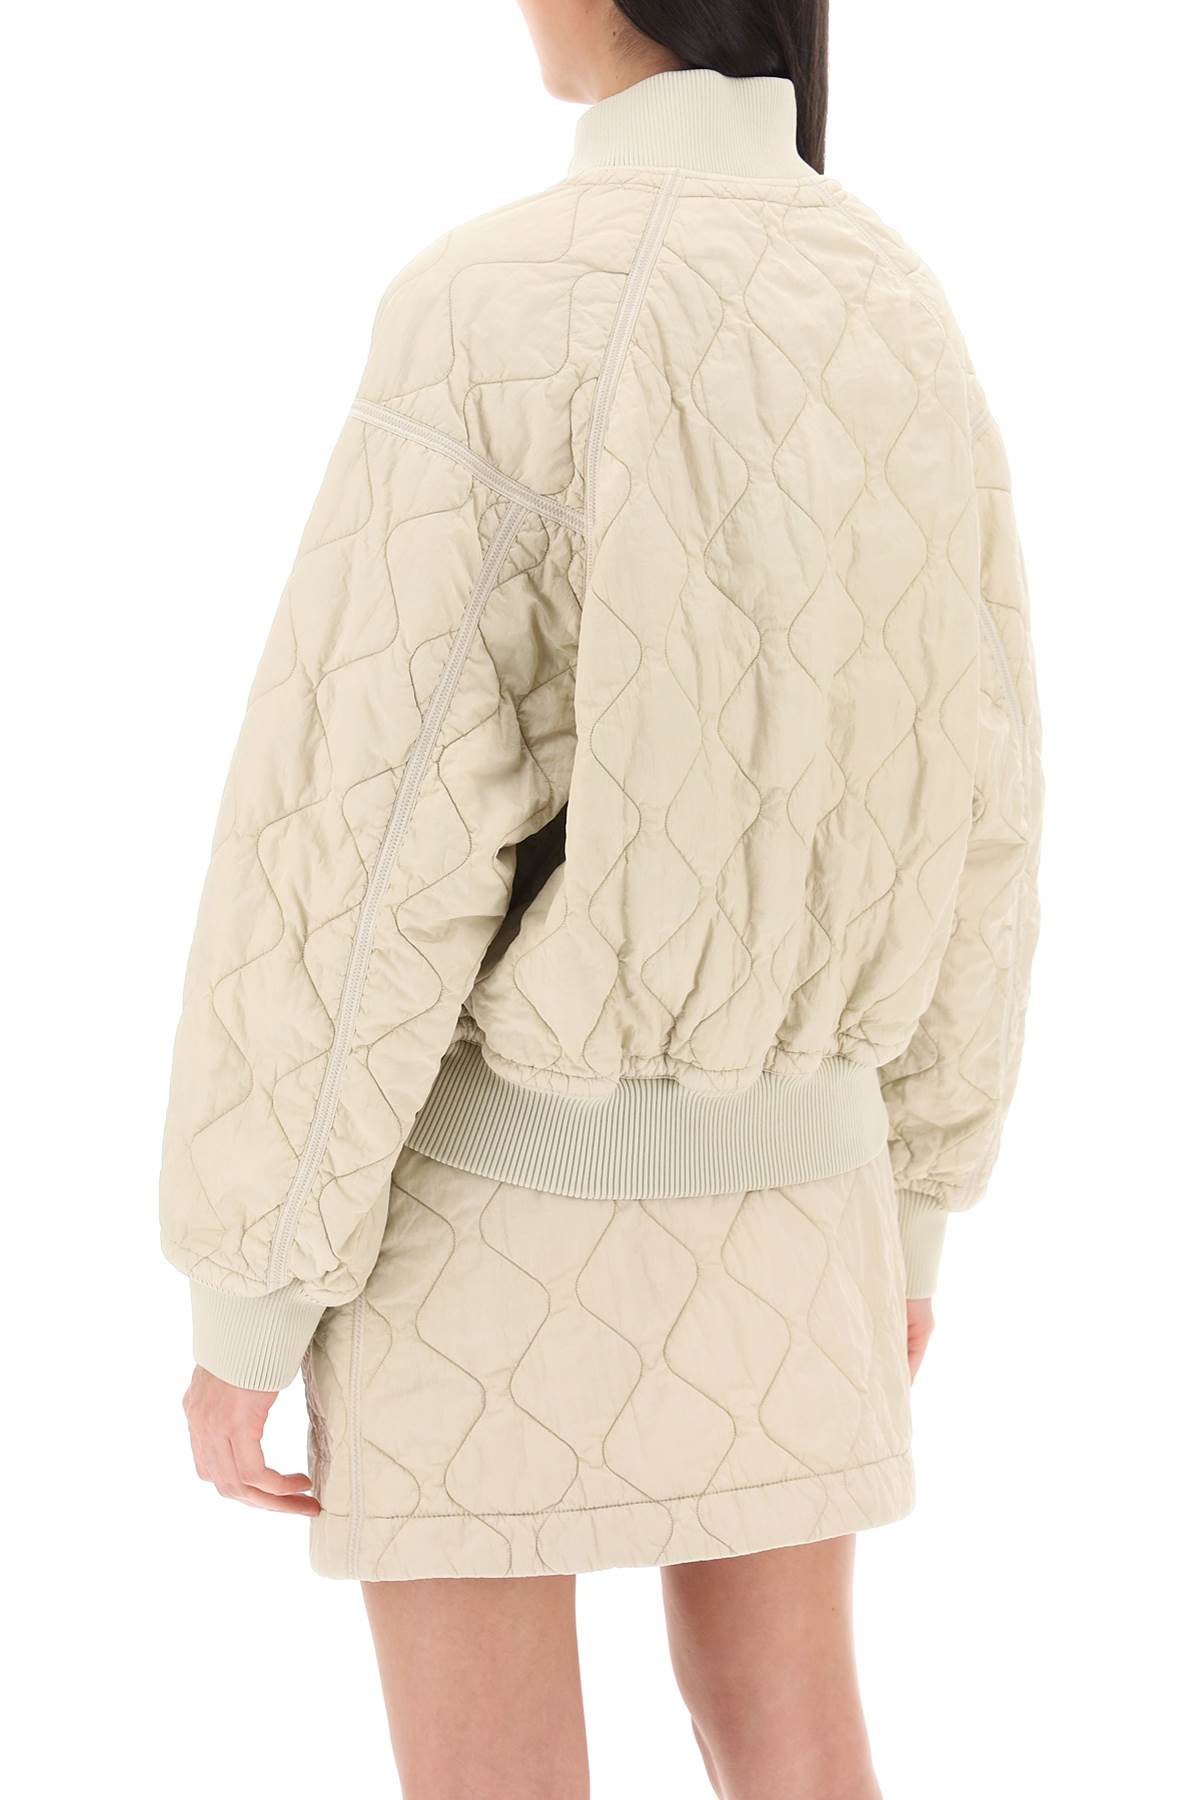 Burberry Quilted Bomber Jacket Women